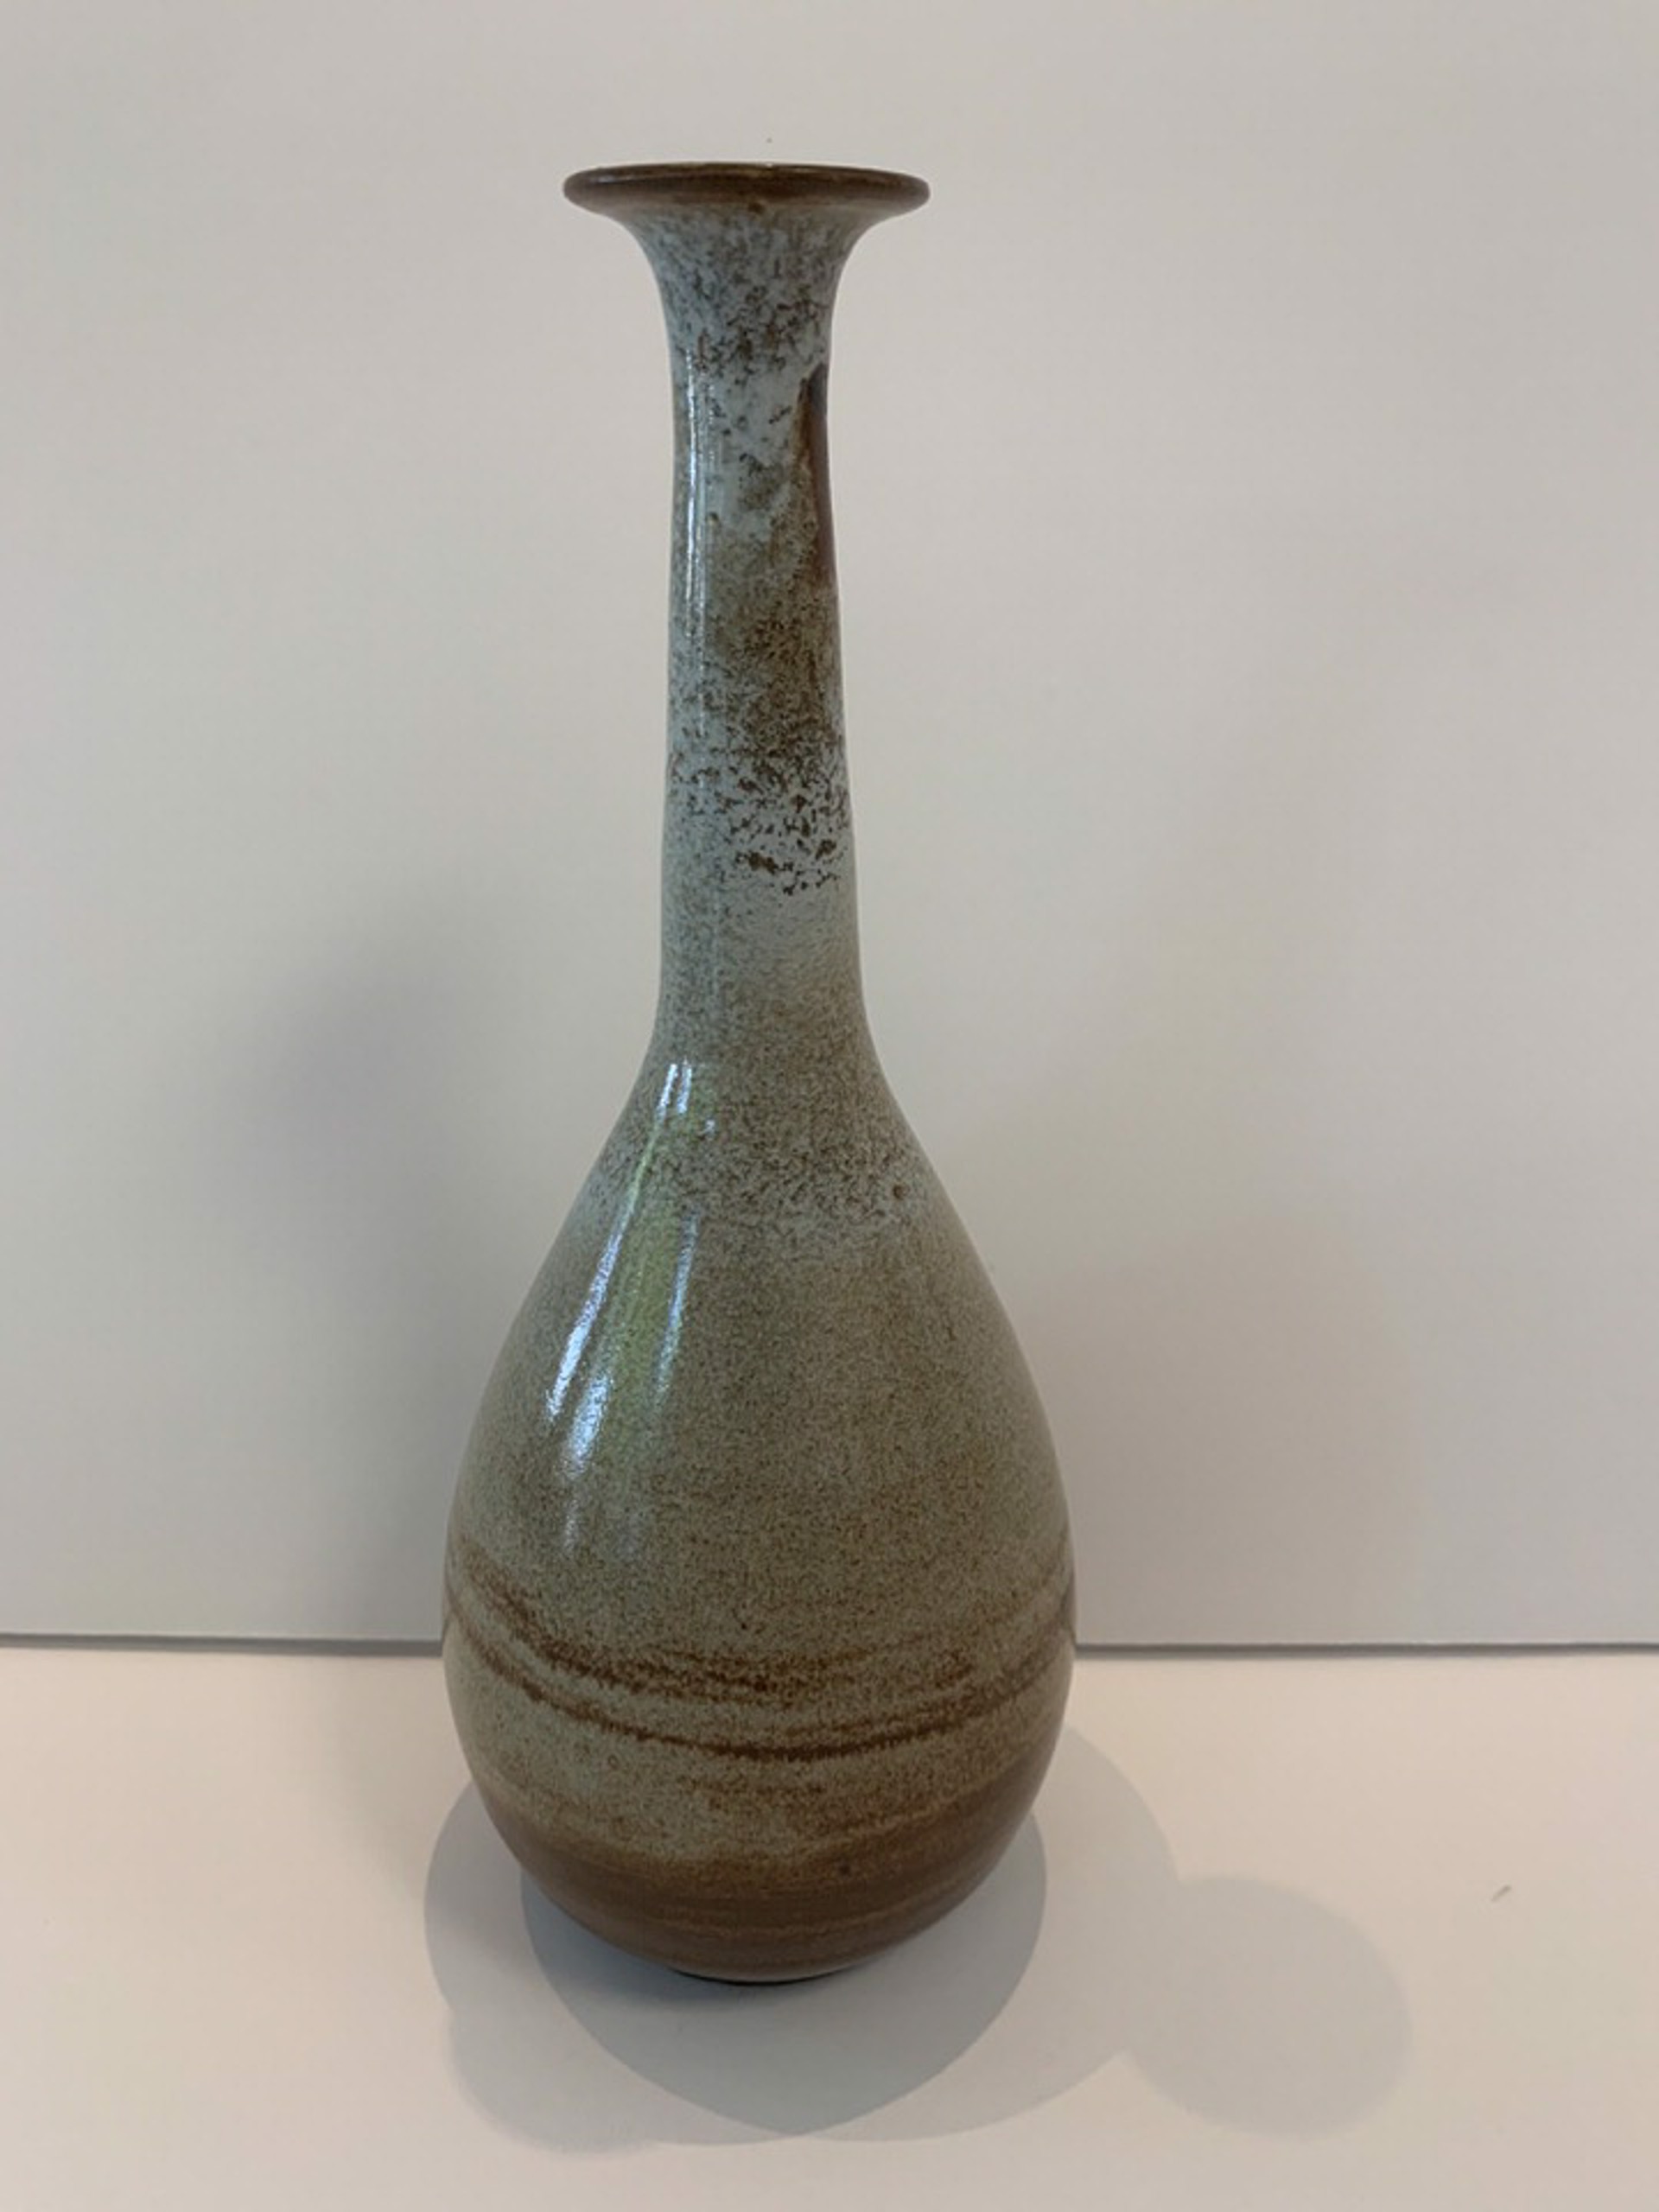 Tall Neck Vase II by Gus Bowen